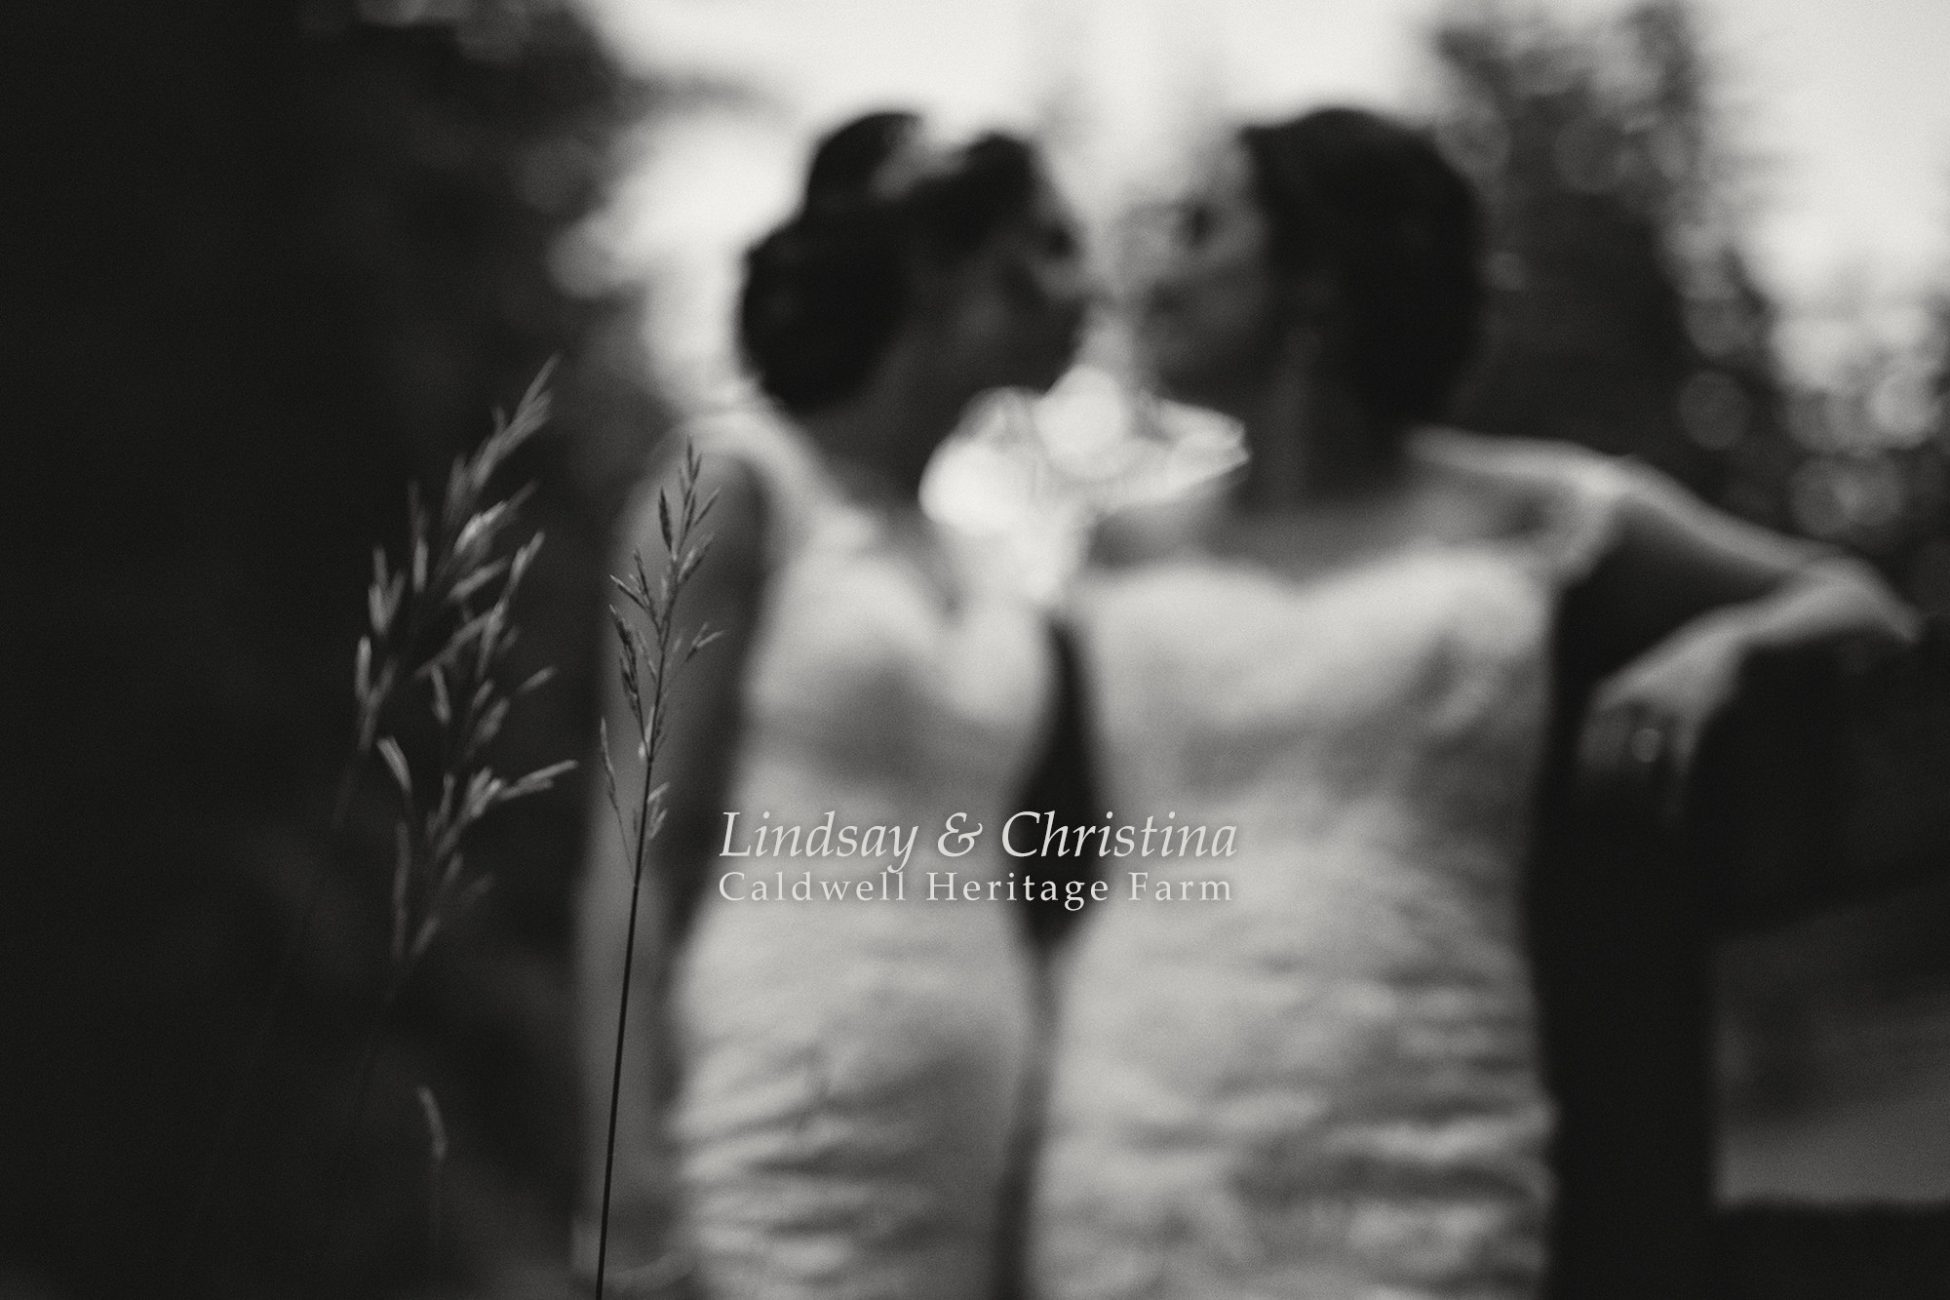 Out-of-focus brides about to share a kiss in a field of tall grass.